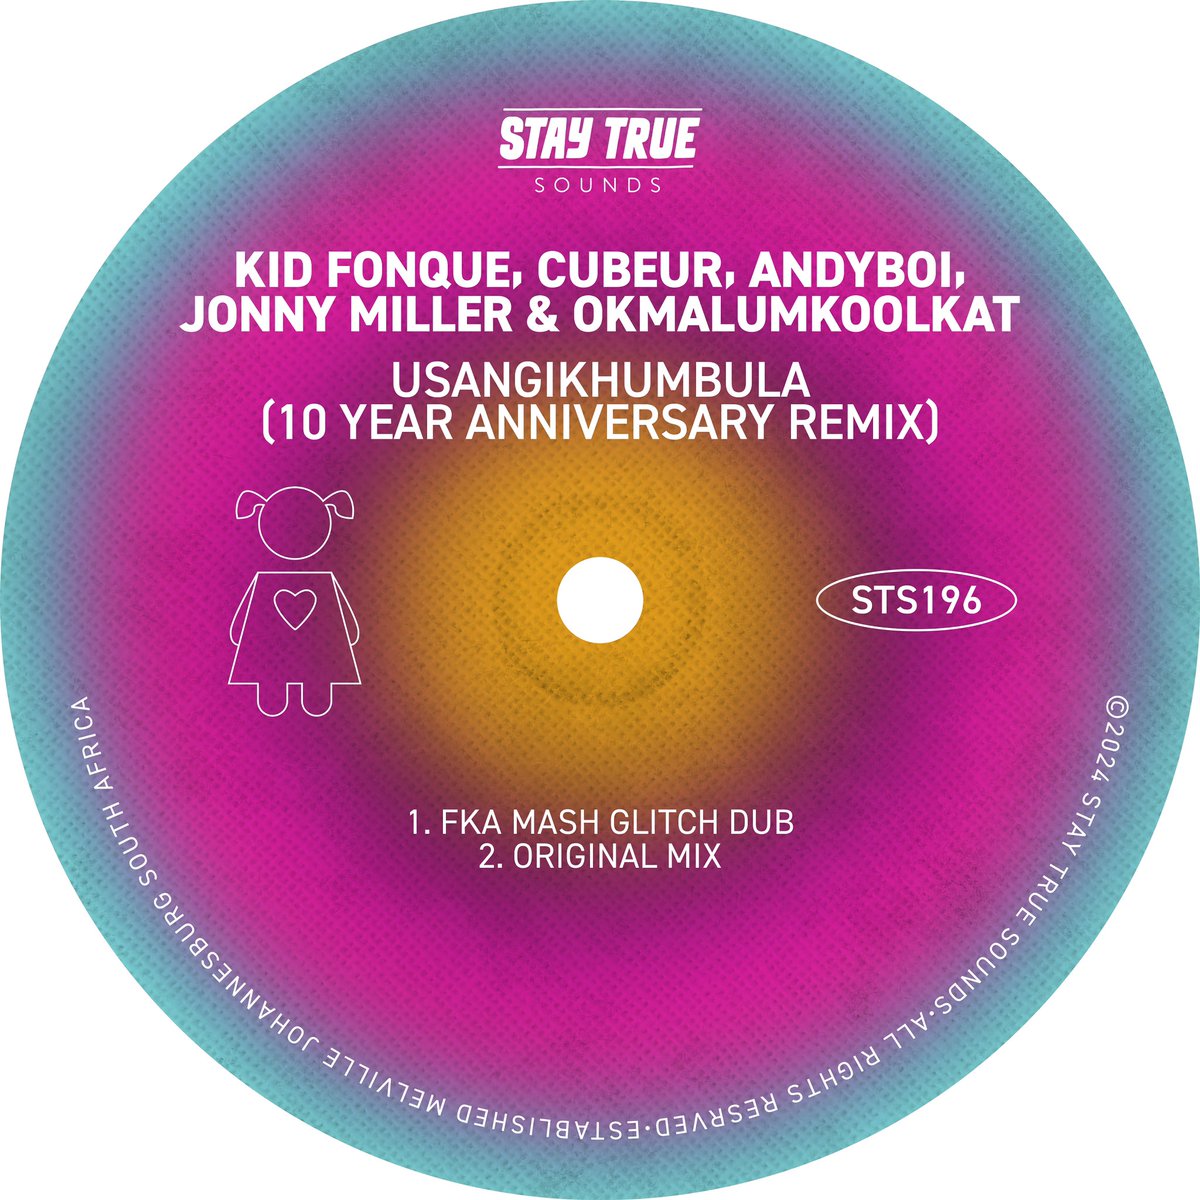 👧🏽🇿🇦 @RealFkaMash has gifted ‘Usangikhumbula’ by @KidFonque , @Cuebur, @AndyboiSA, @jonnymiller @ Okmalumkoolkat with a Glitch Dub for its 10 year anniversary and it’s OUT NOW!!!🏆✨ 👀 🔗👉🏼 staytruesounds.lnk.to/STS196B #deephouse #expensivemusic #staytruesounds